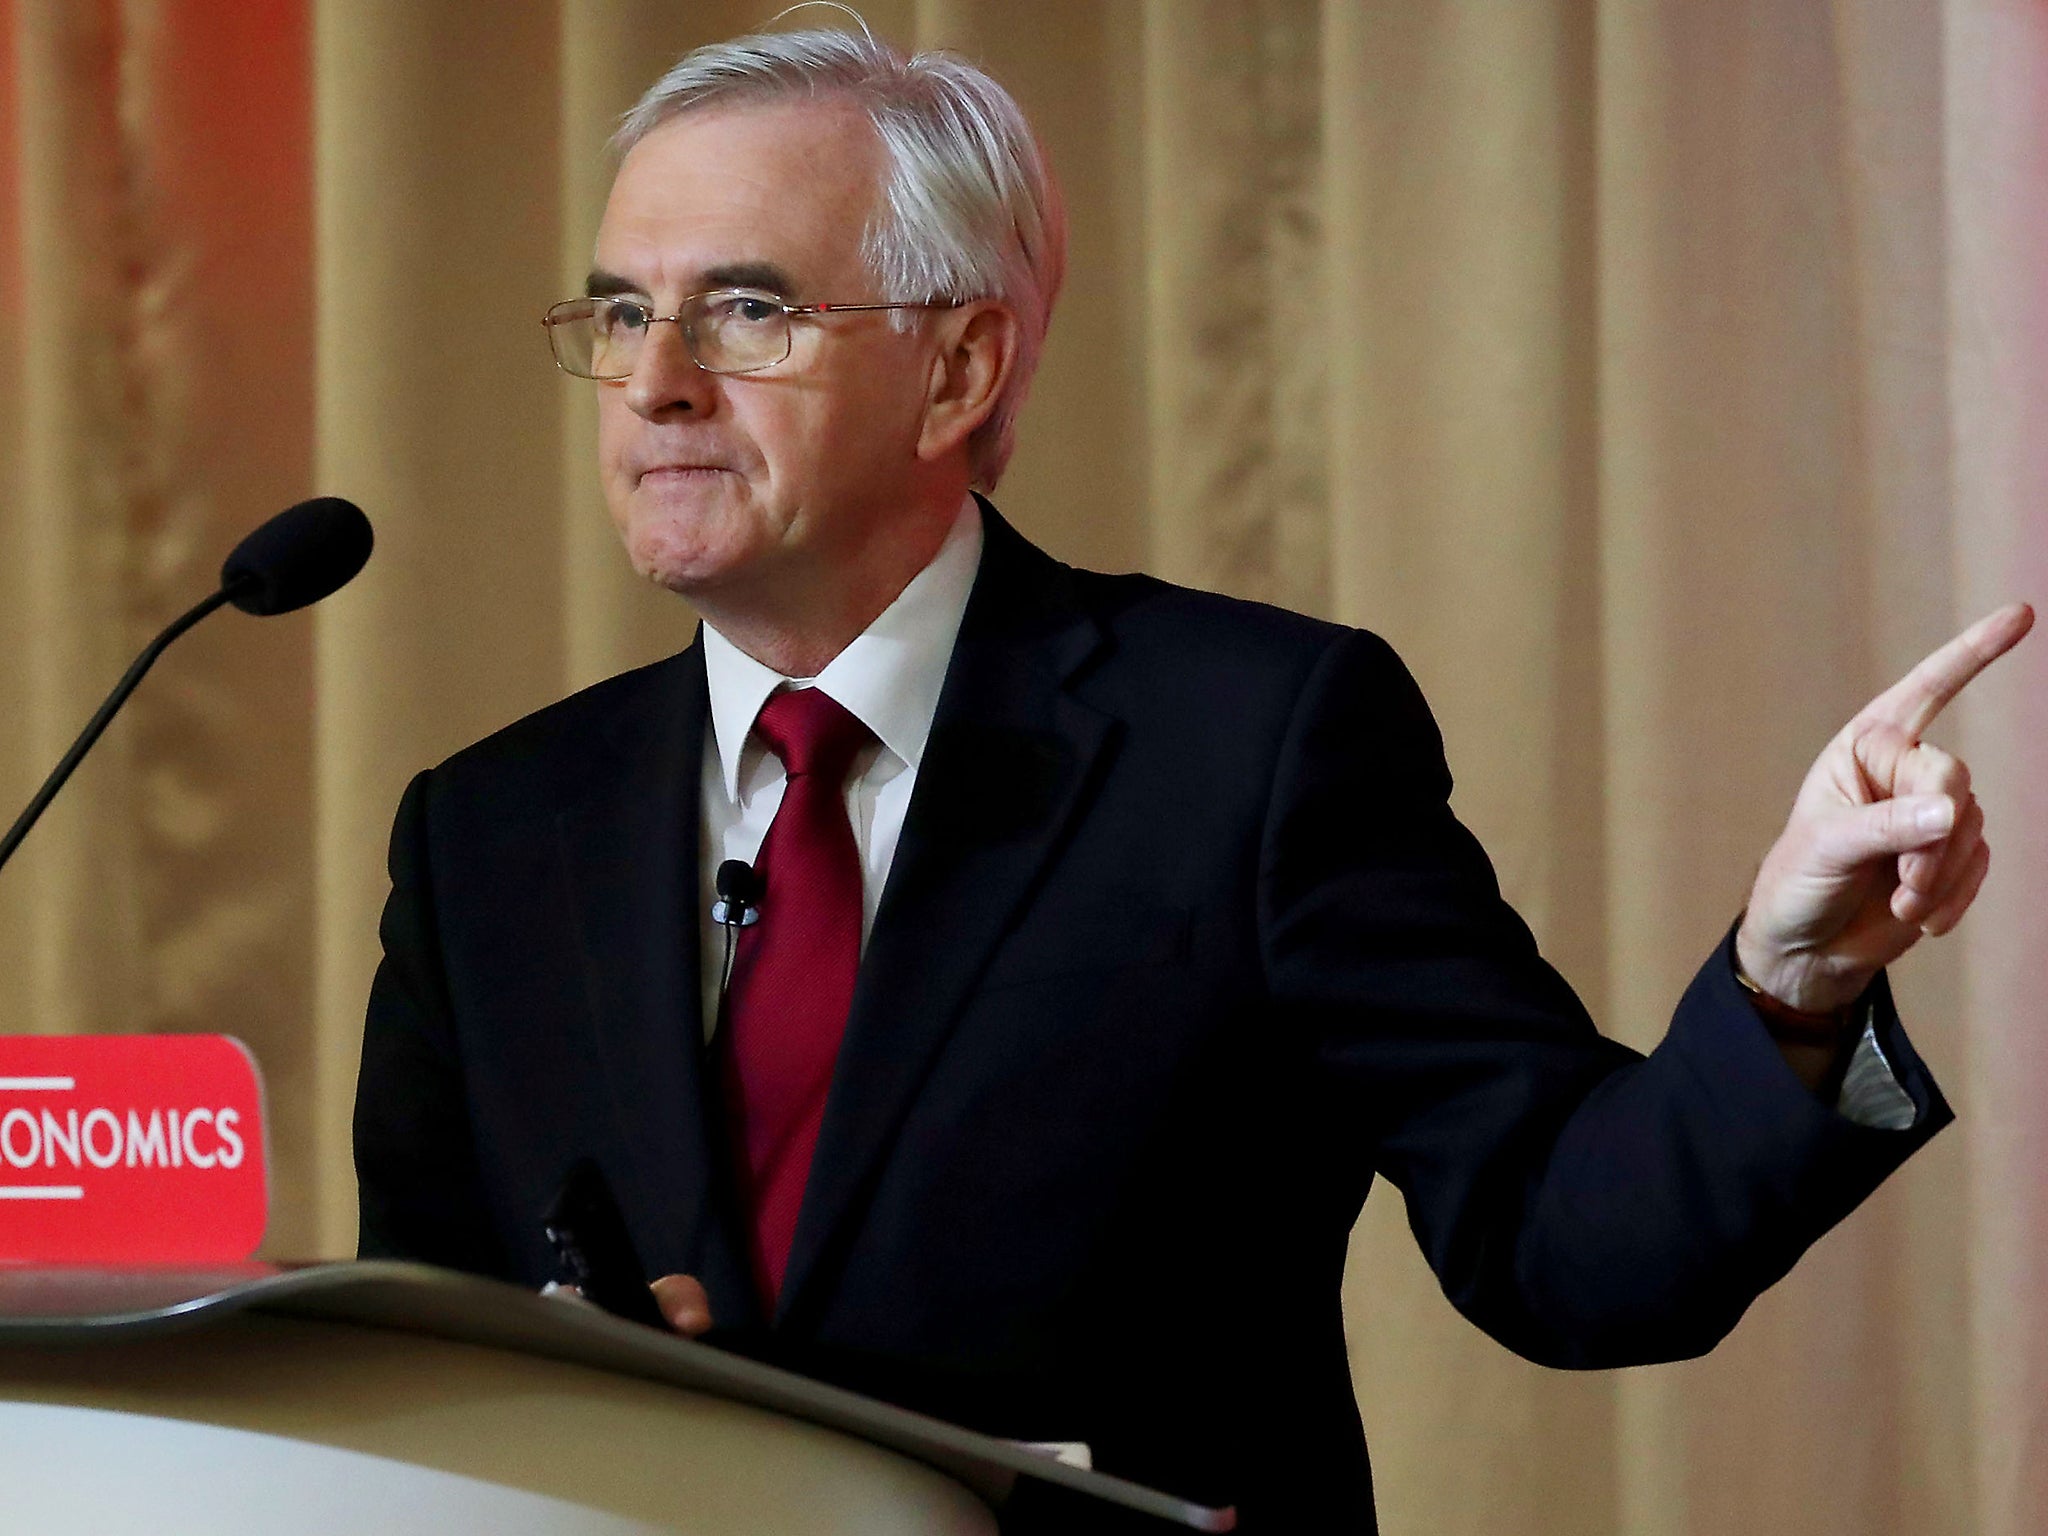 Shadow chancellor John McDonnell speaking at Labour's economic conference at The Devonshire House Hotel in Liverpool